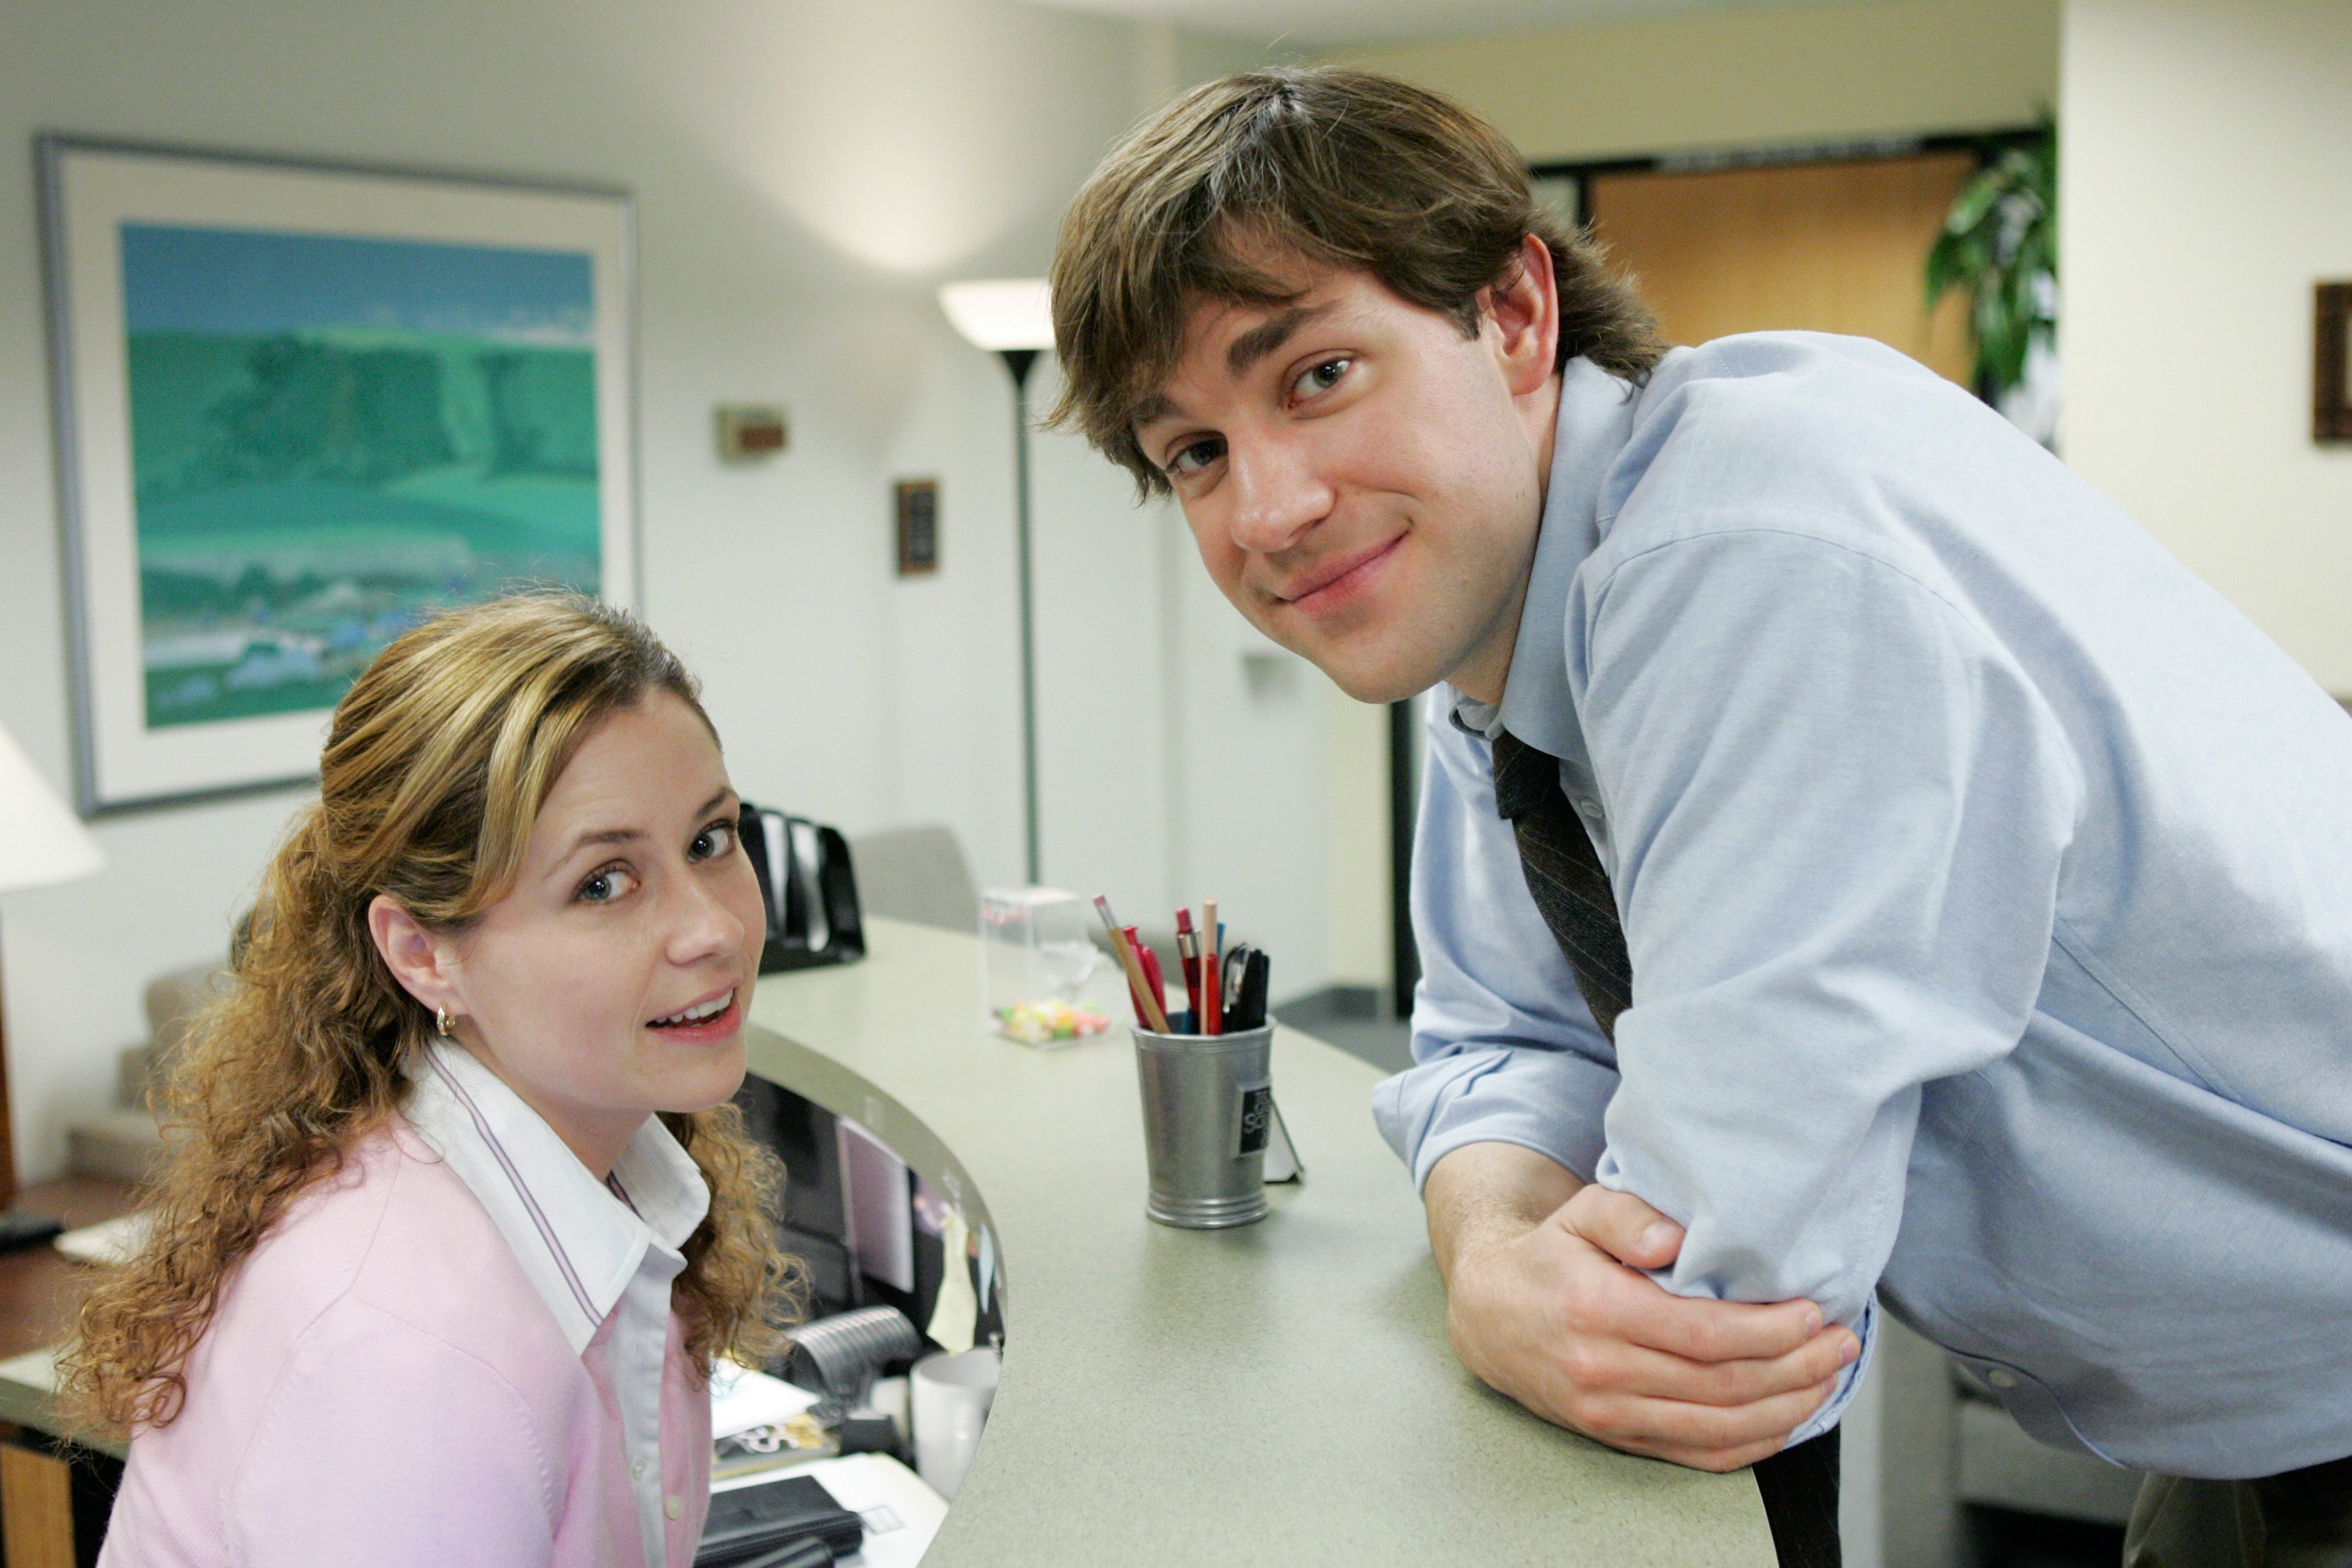 2. Jim and Pam on ‘The Office’